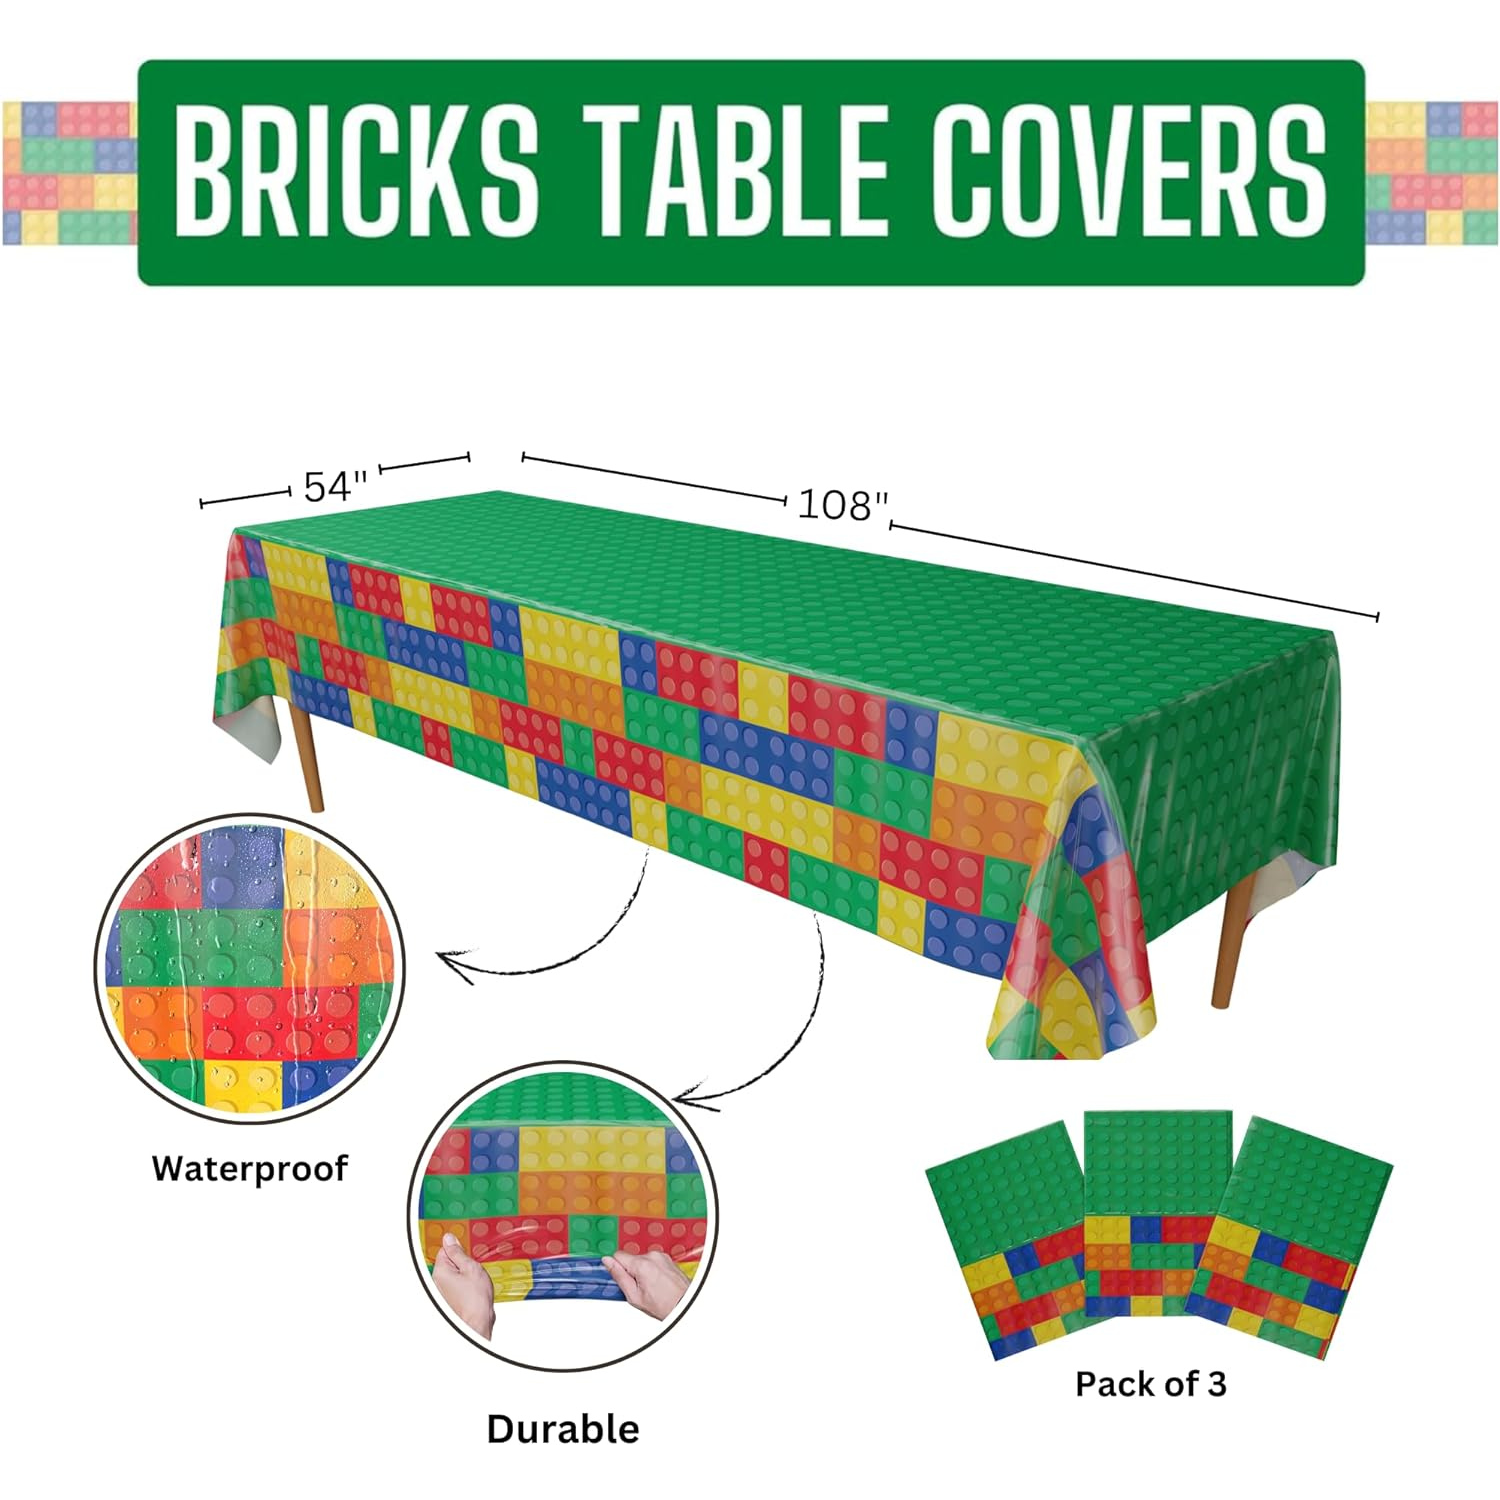 Brick Table Covers (Pack of 3) - 54"x108" XL